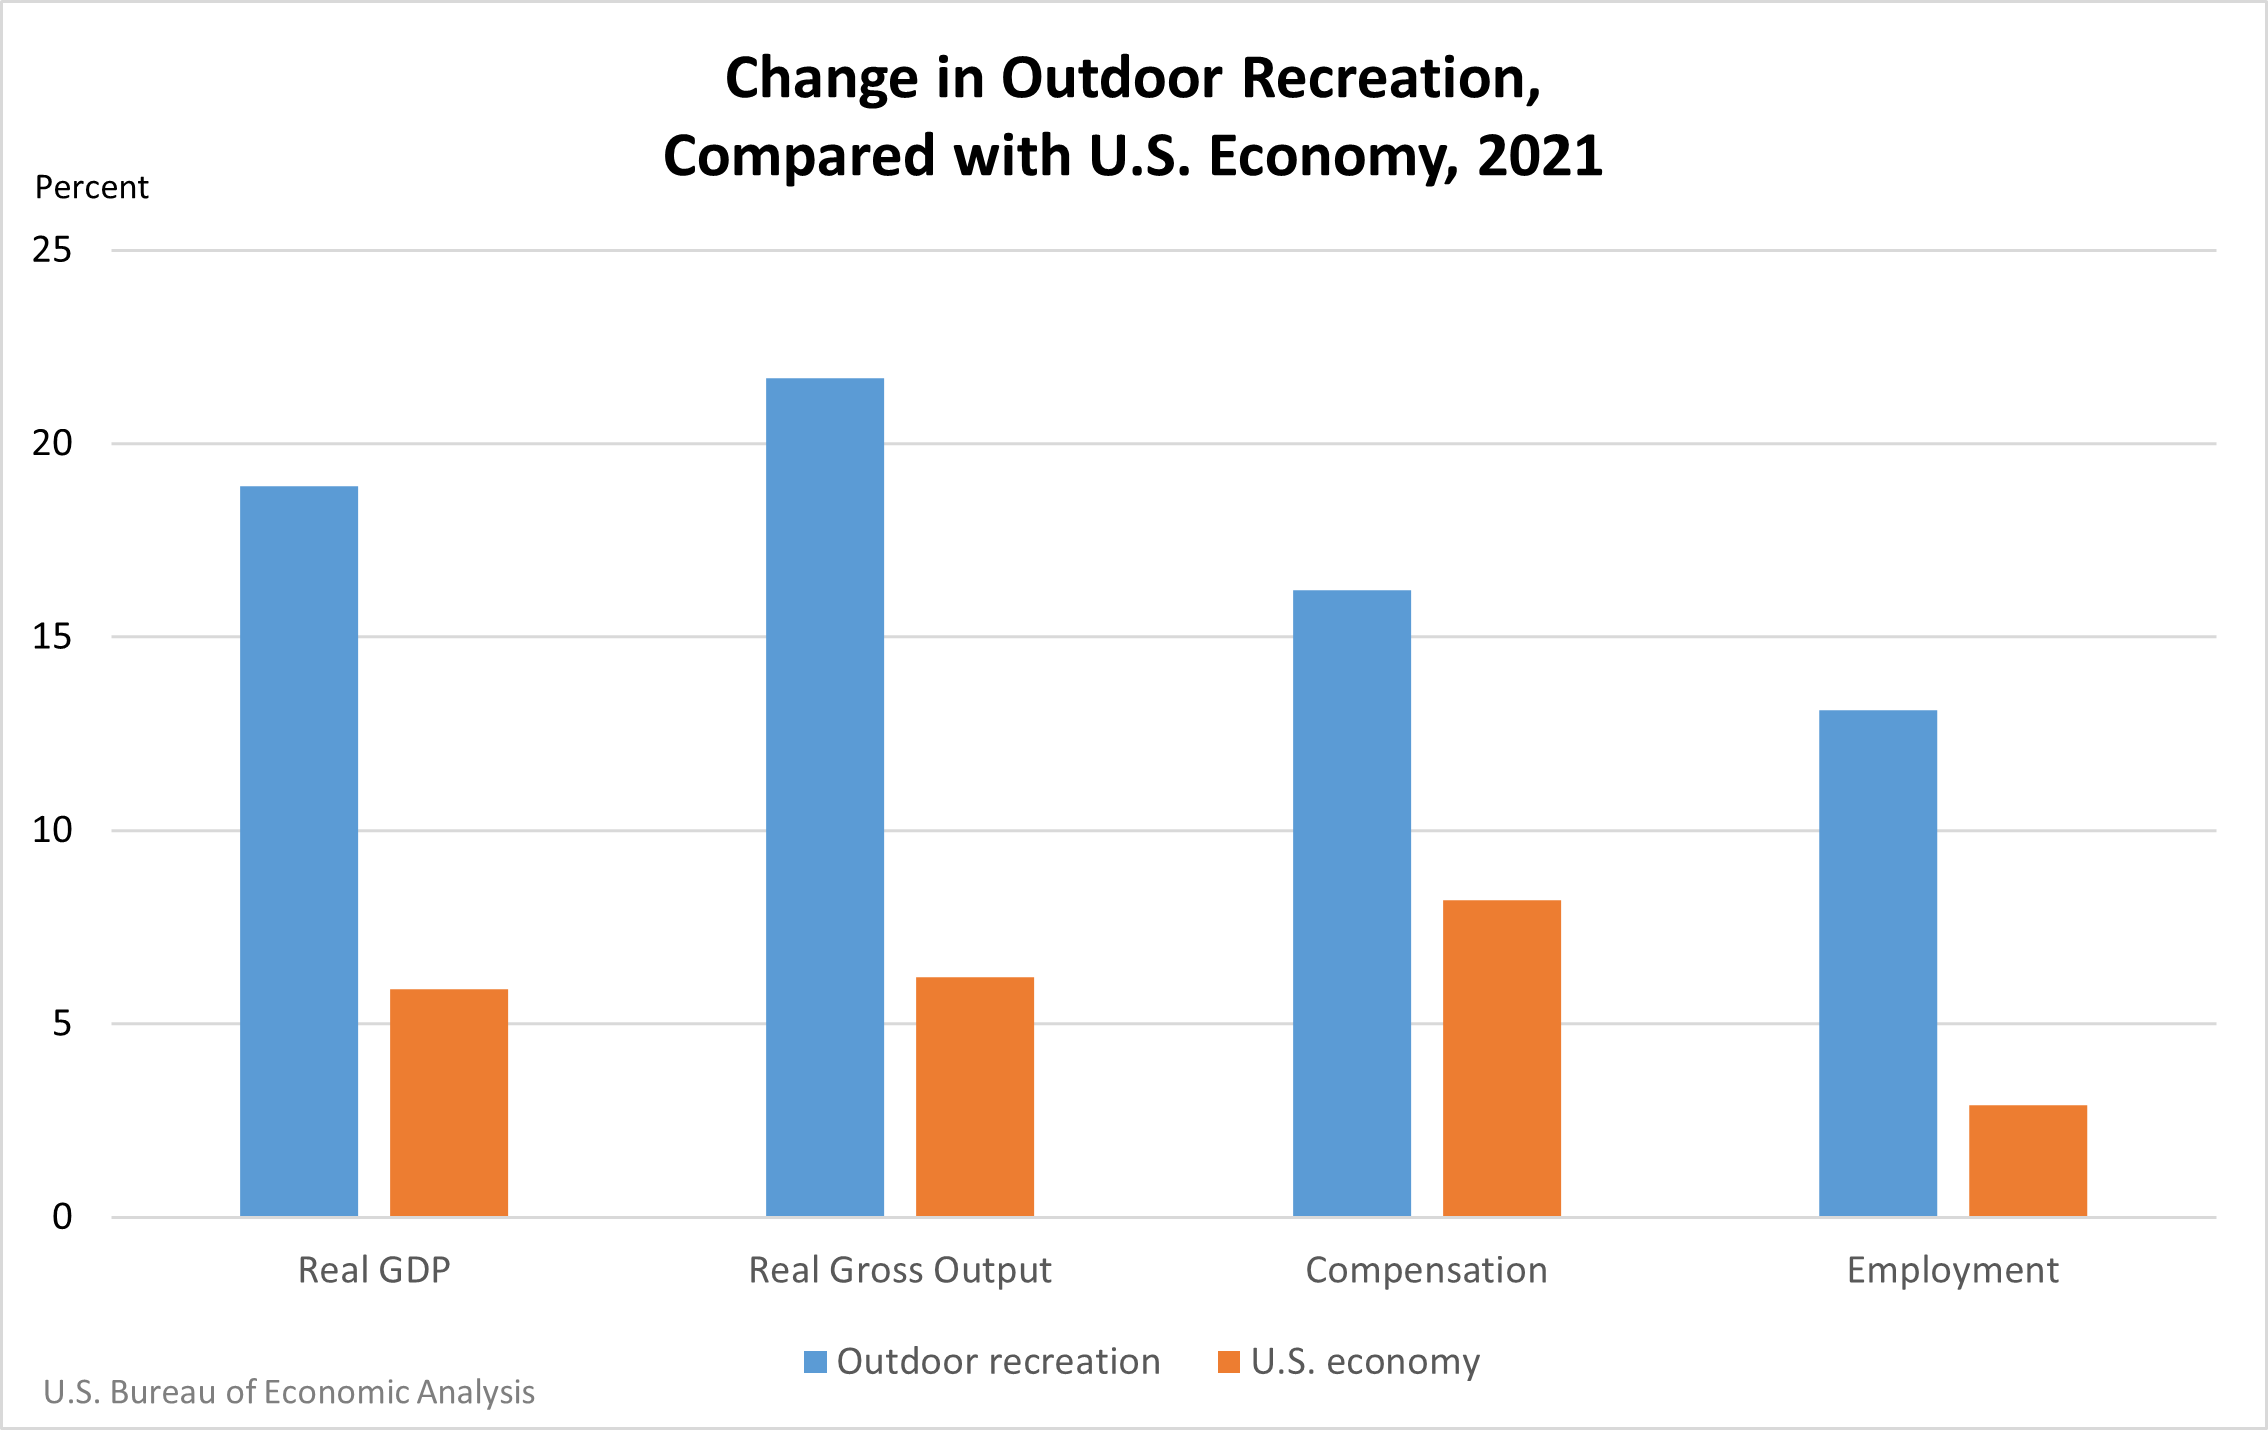 Change in Outdoor Recreation Compared with Change in U.S. Economy, 2021